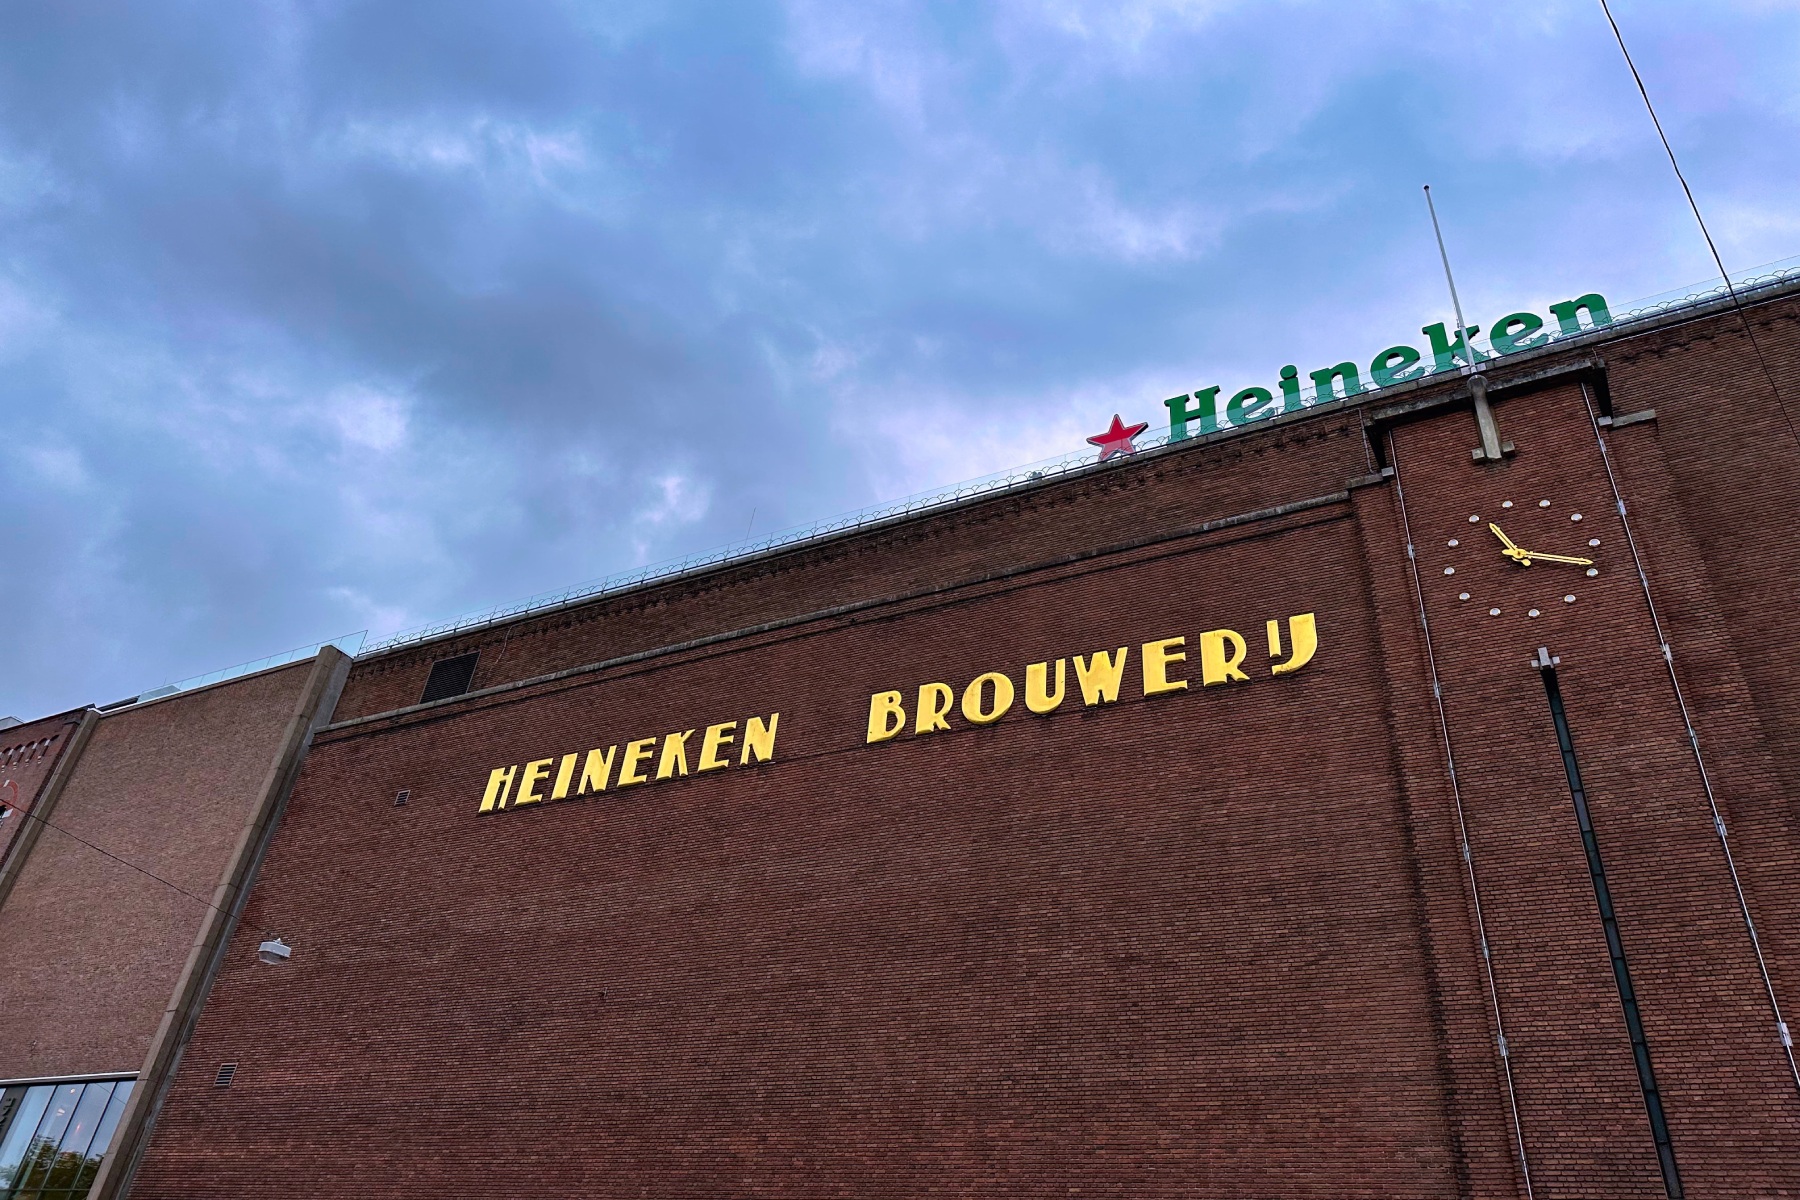 An exterior shot of the Heineken Brewery in Amsterdam with its red brick walls